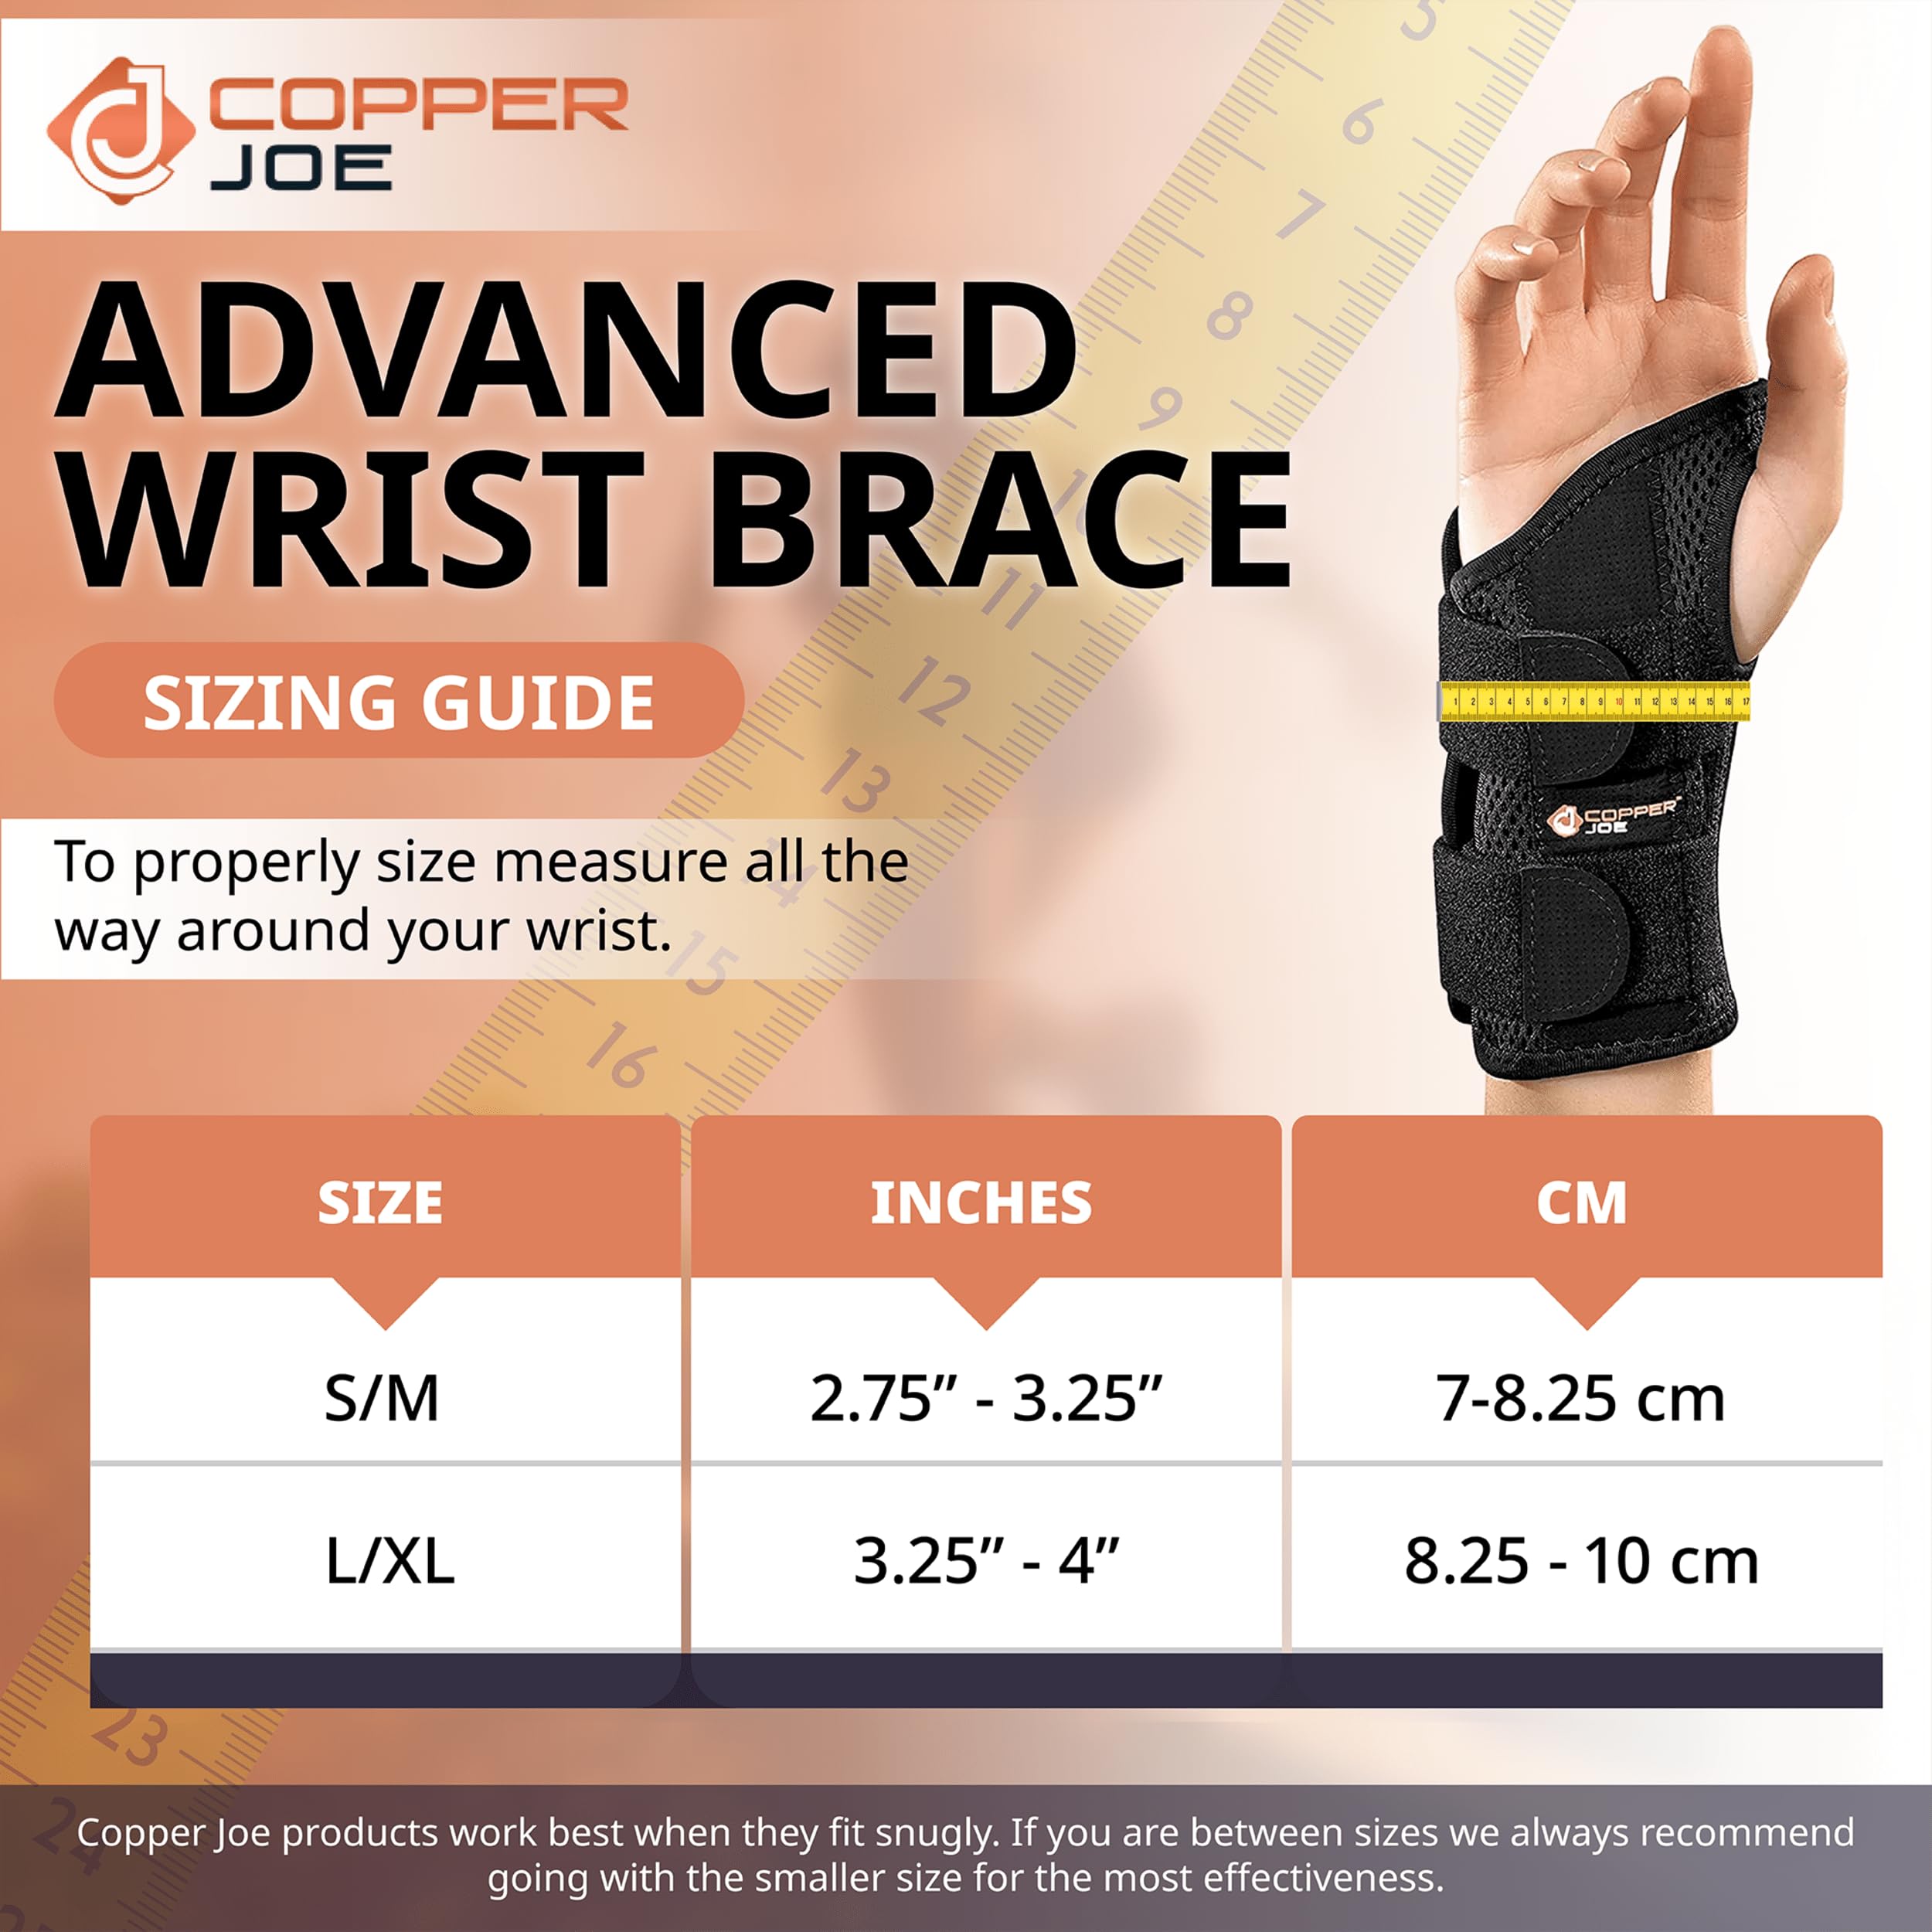 Copper Joe Carpal Tunnel Wrist Brace for Day and Night Support - Compression Wrist Sleeve For Arthritis, Tendonitis, RSI and Sprain - Adjustable Wrist Splint fit For Men and Women (Right Hand S/M)